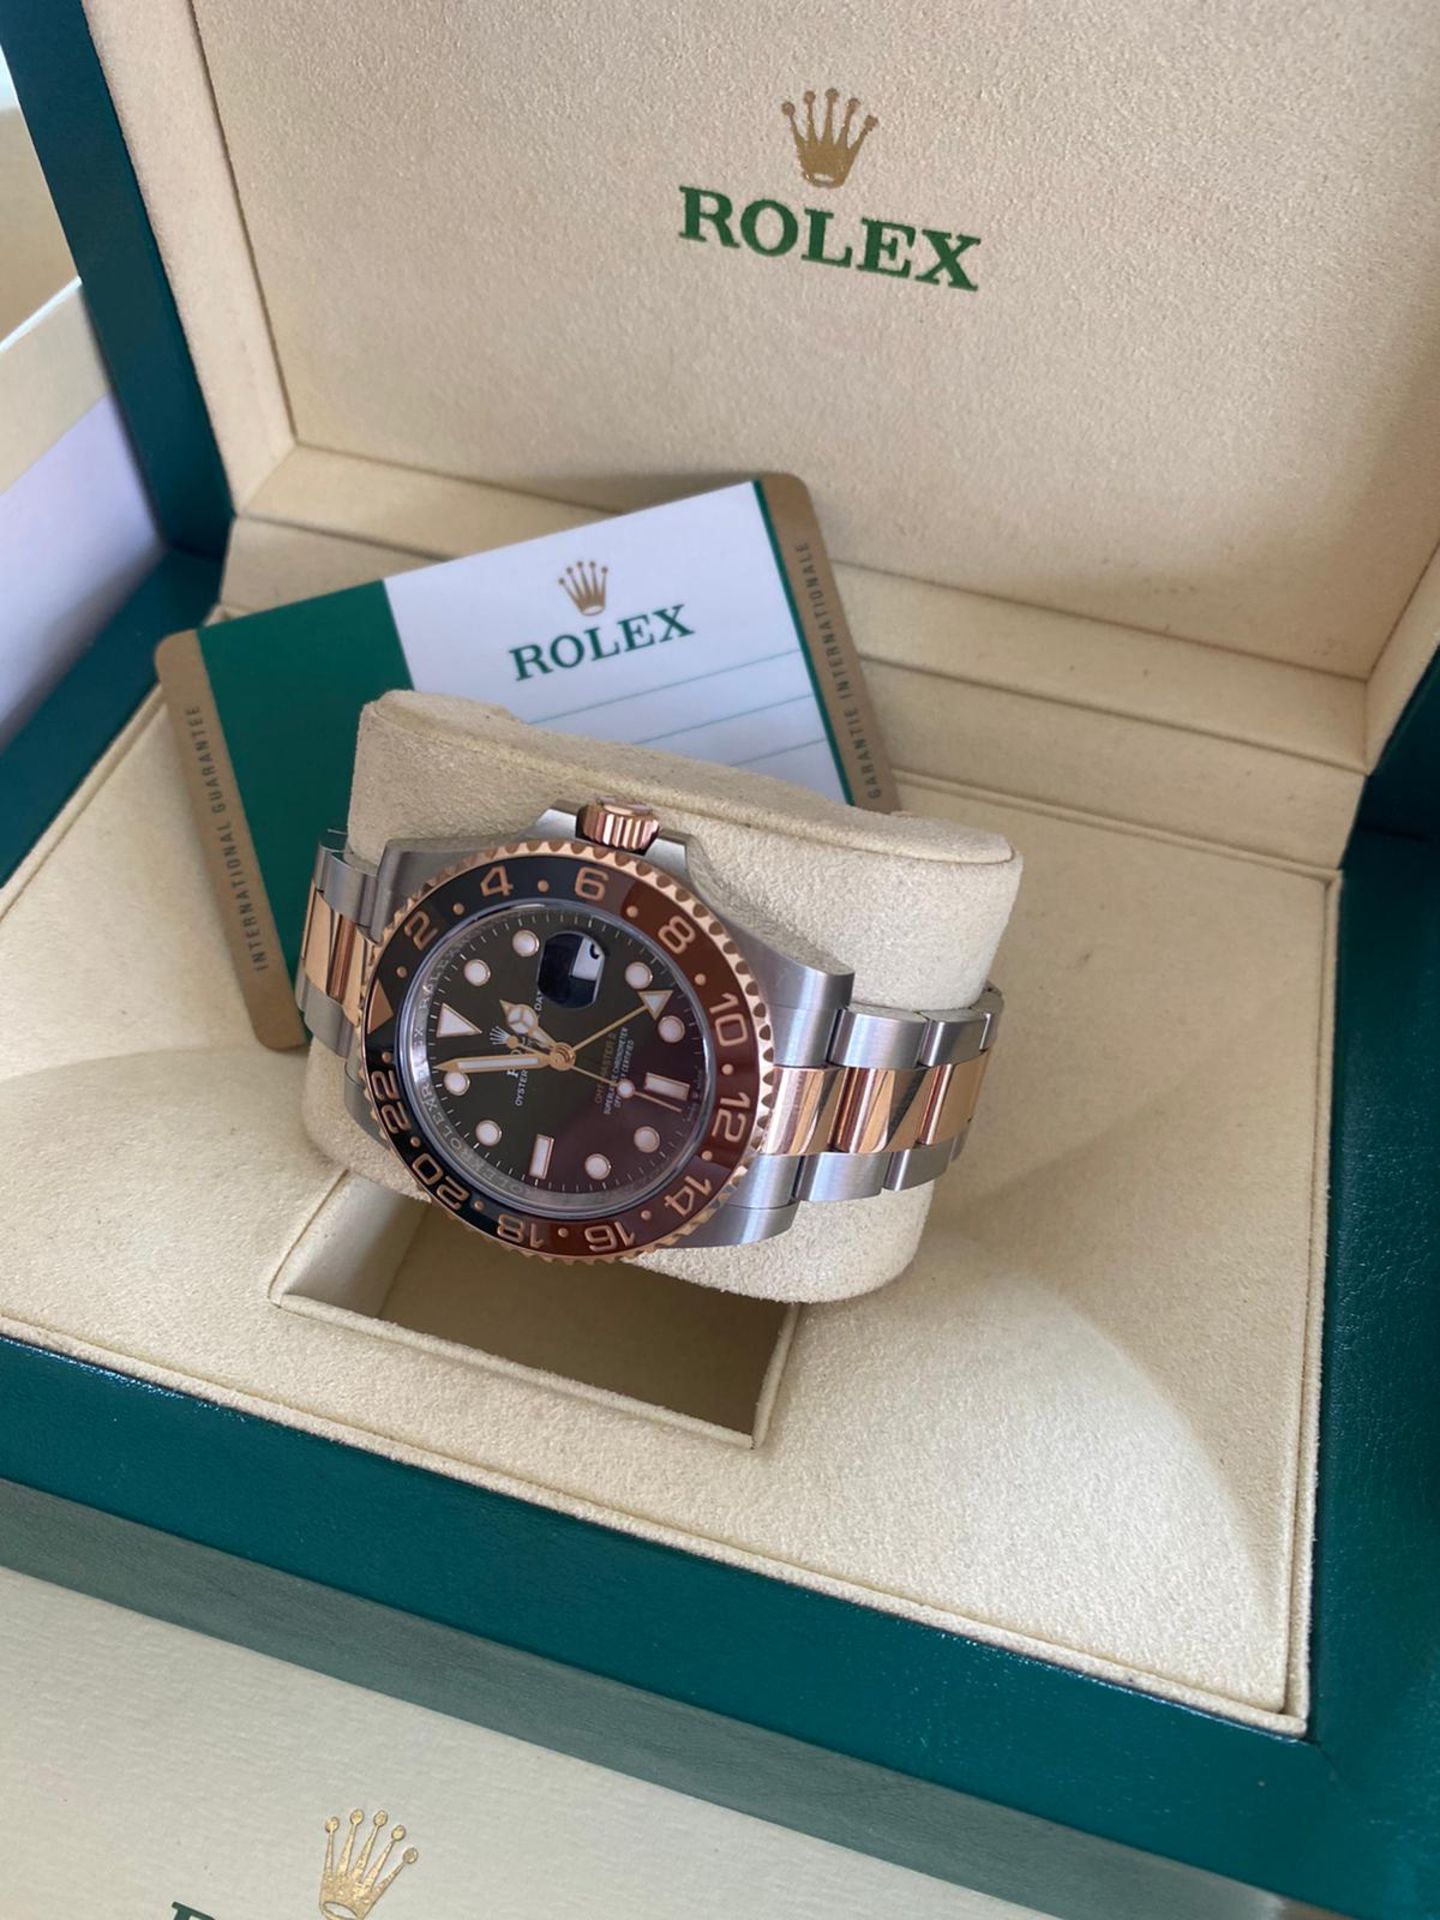 2019 ROLEX GMT MASTER II ROOT BEER WATCH LOCATION NORTH YORKSHIRE - Image 2 of 4